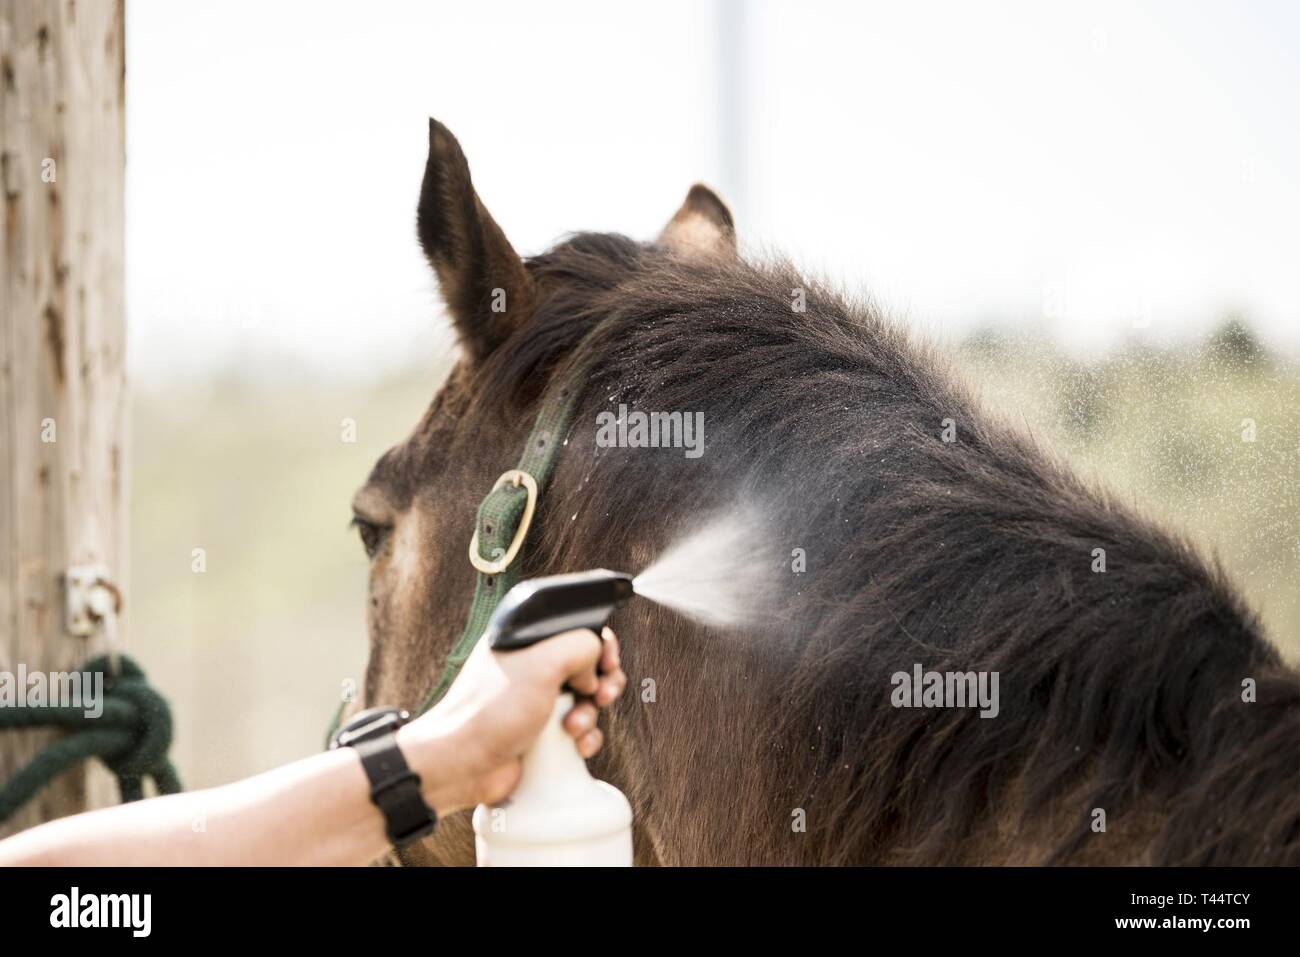 enior Airman Michael Terrazas, 30th Security Forces Squadron conservation patrolman, sprays detangler into Military Working Horse 'Buck’s' mane Feb. 25, 2019, at Vandenberg Air Force Base, Calif. Military working horses are groomed daily to ensure they are healthy and ready to complete the mission. Stock Photo